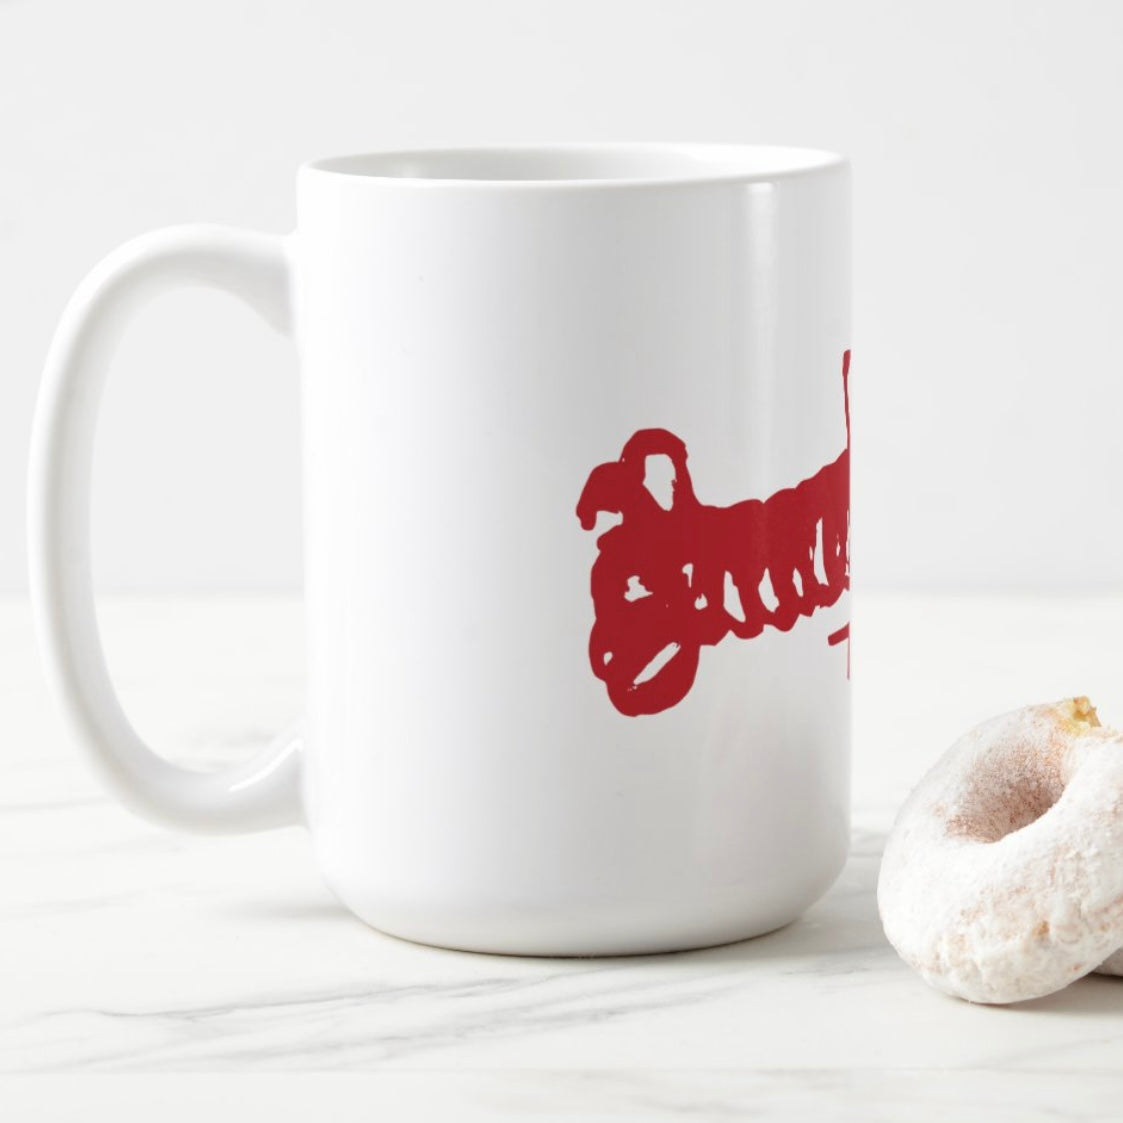 MUG - LOBSTER WITH MITTENS